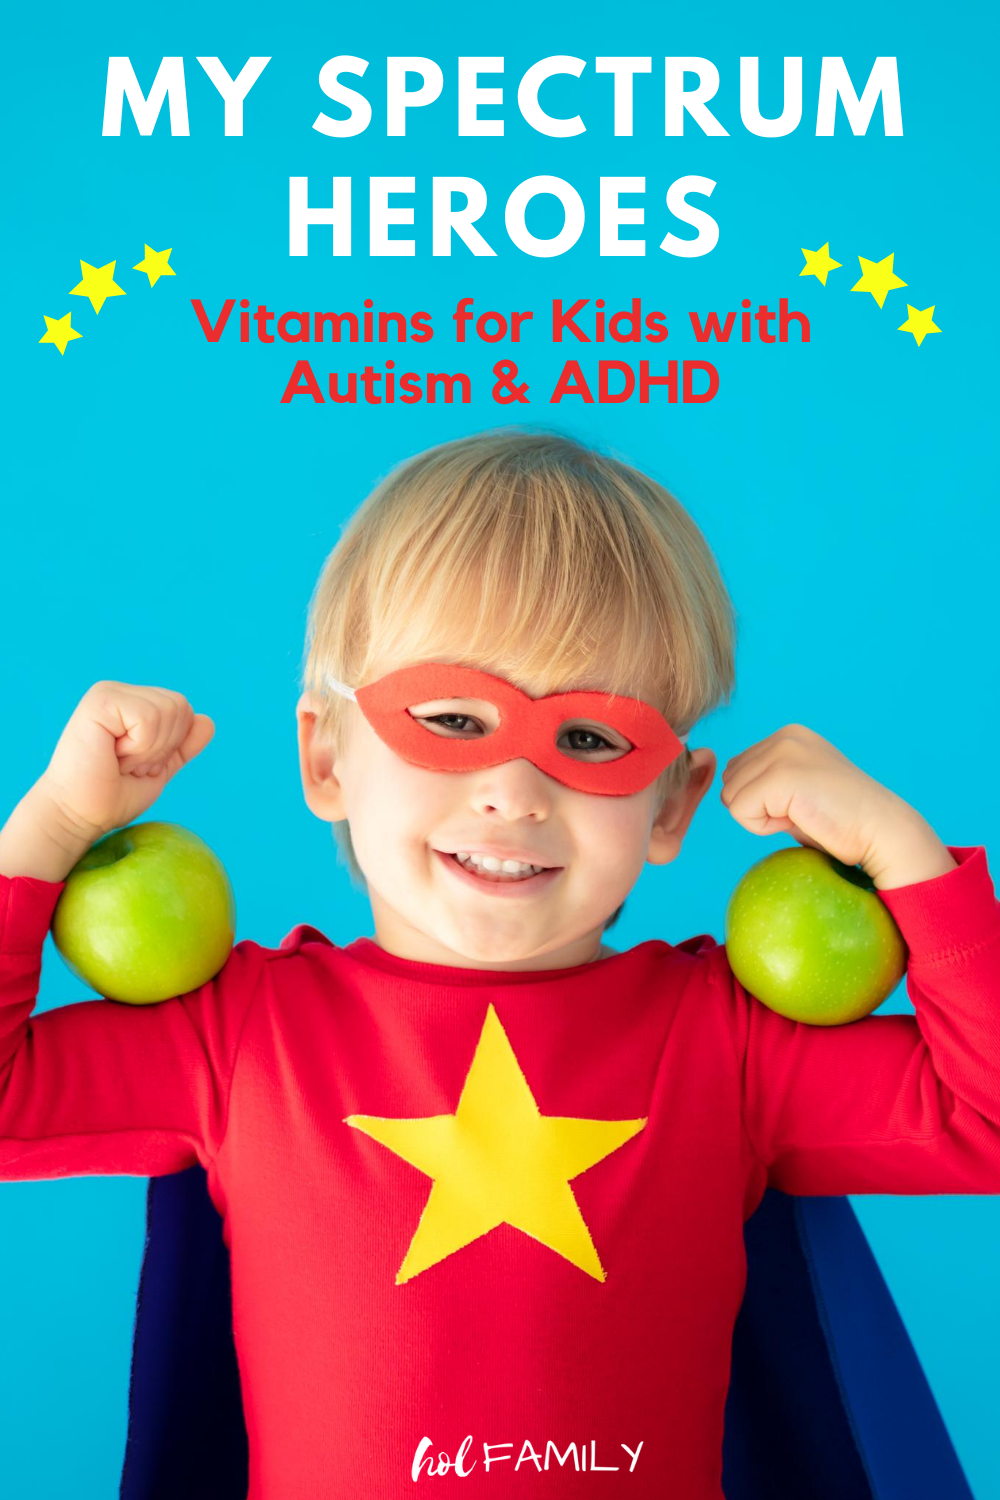 My Spectrum Heroes Vitamins for Autism and ADHD